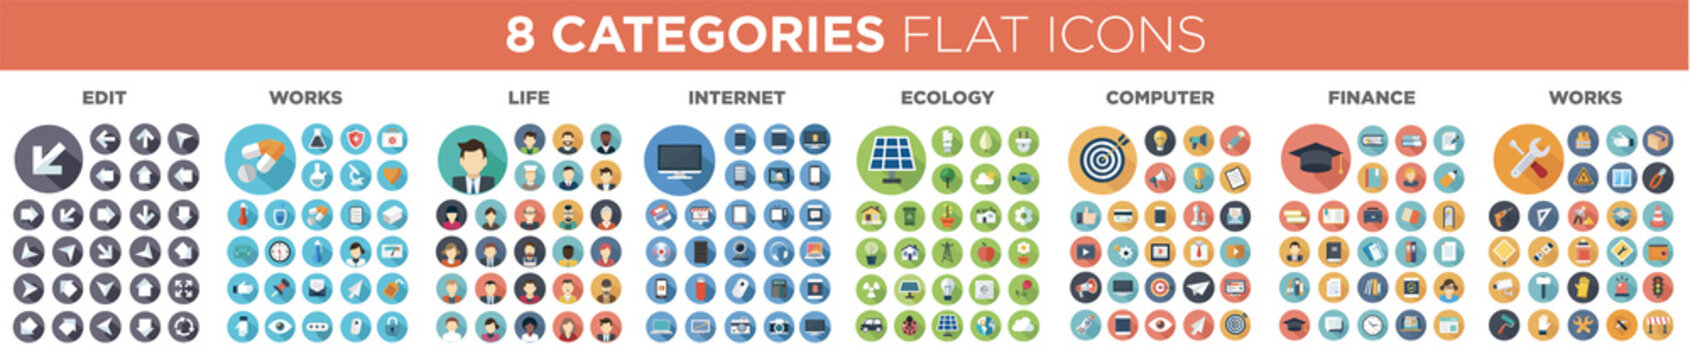 flat icons collections